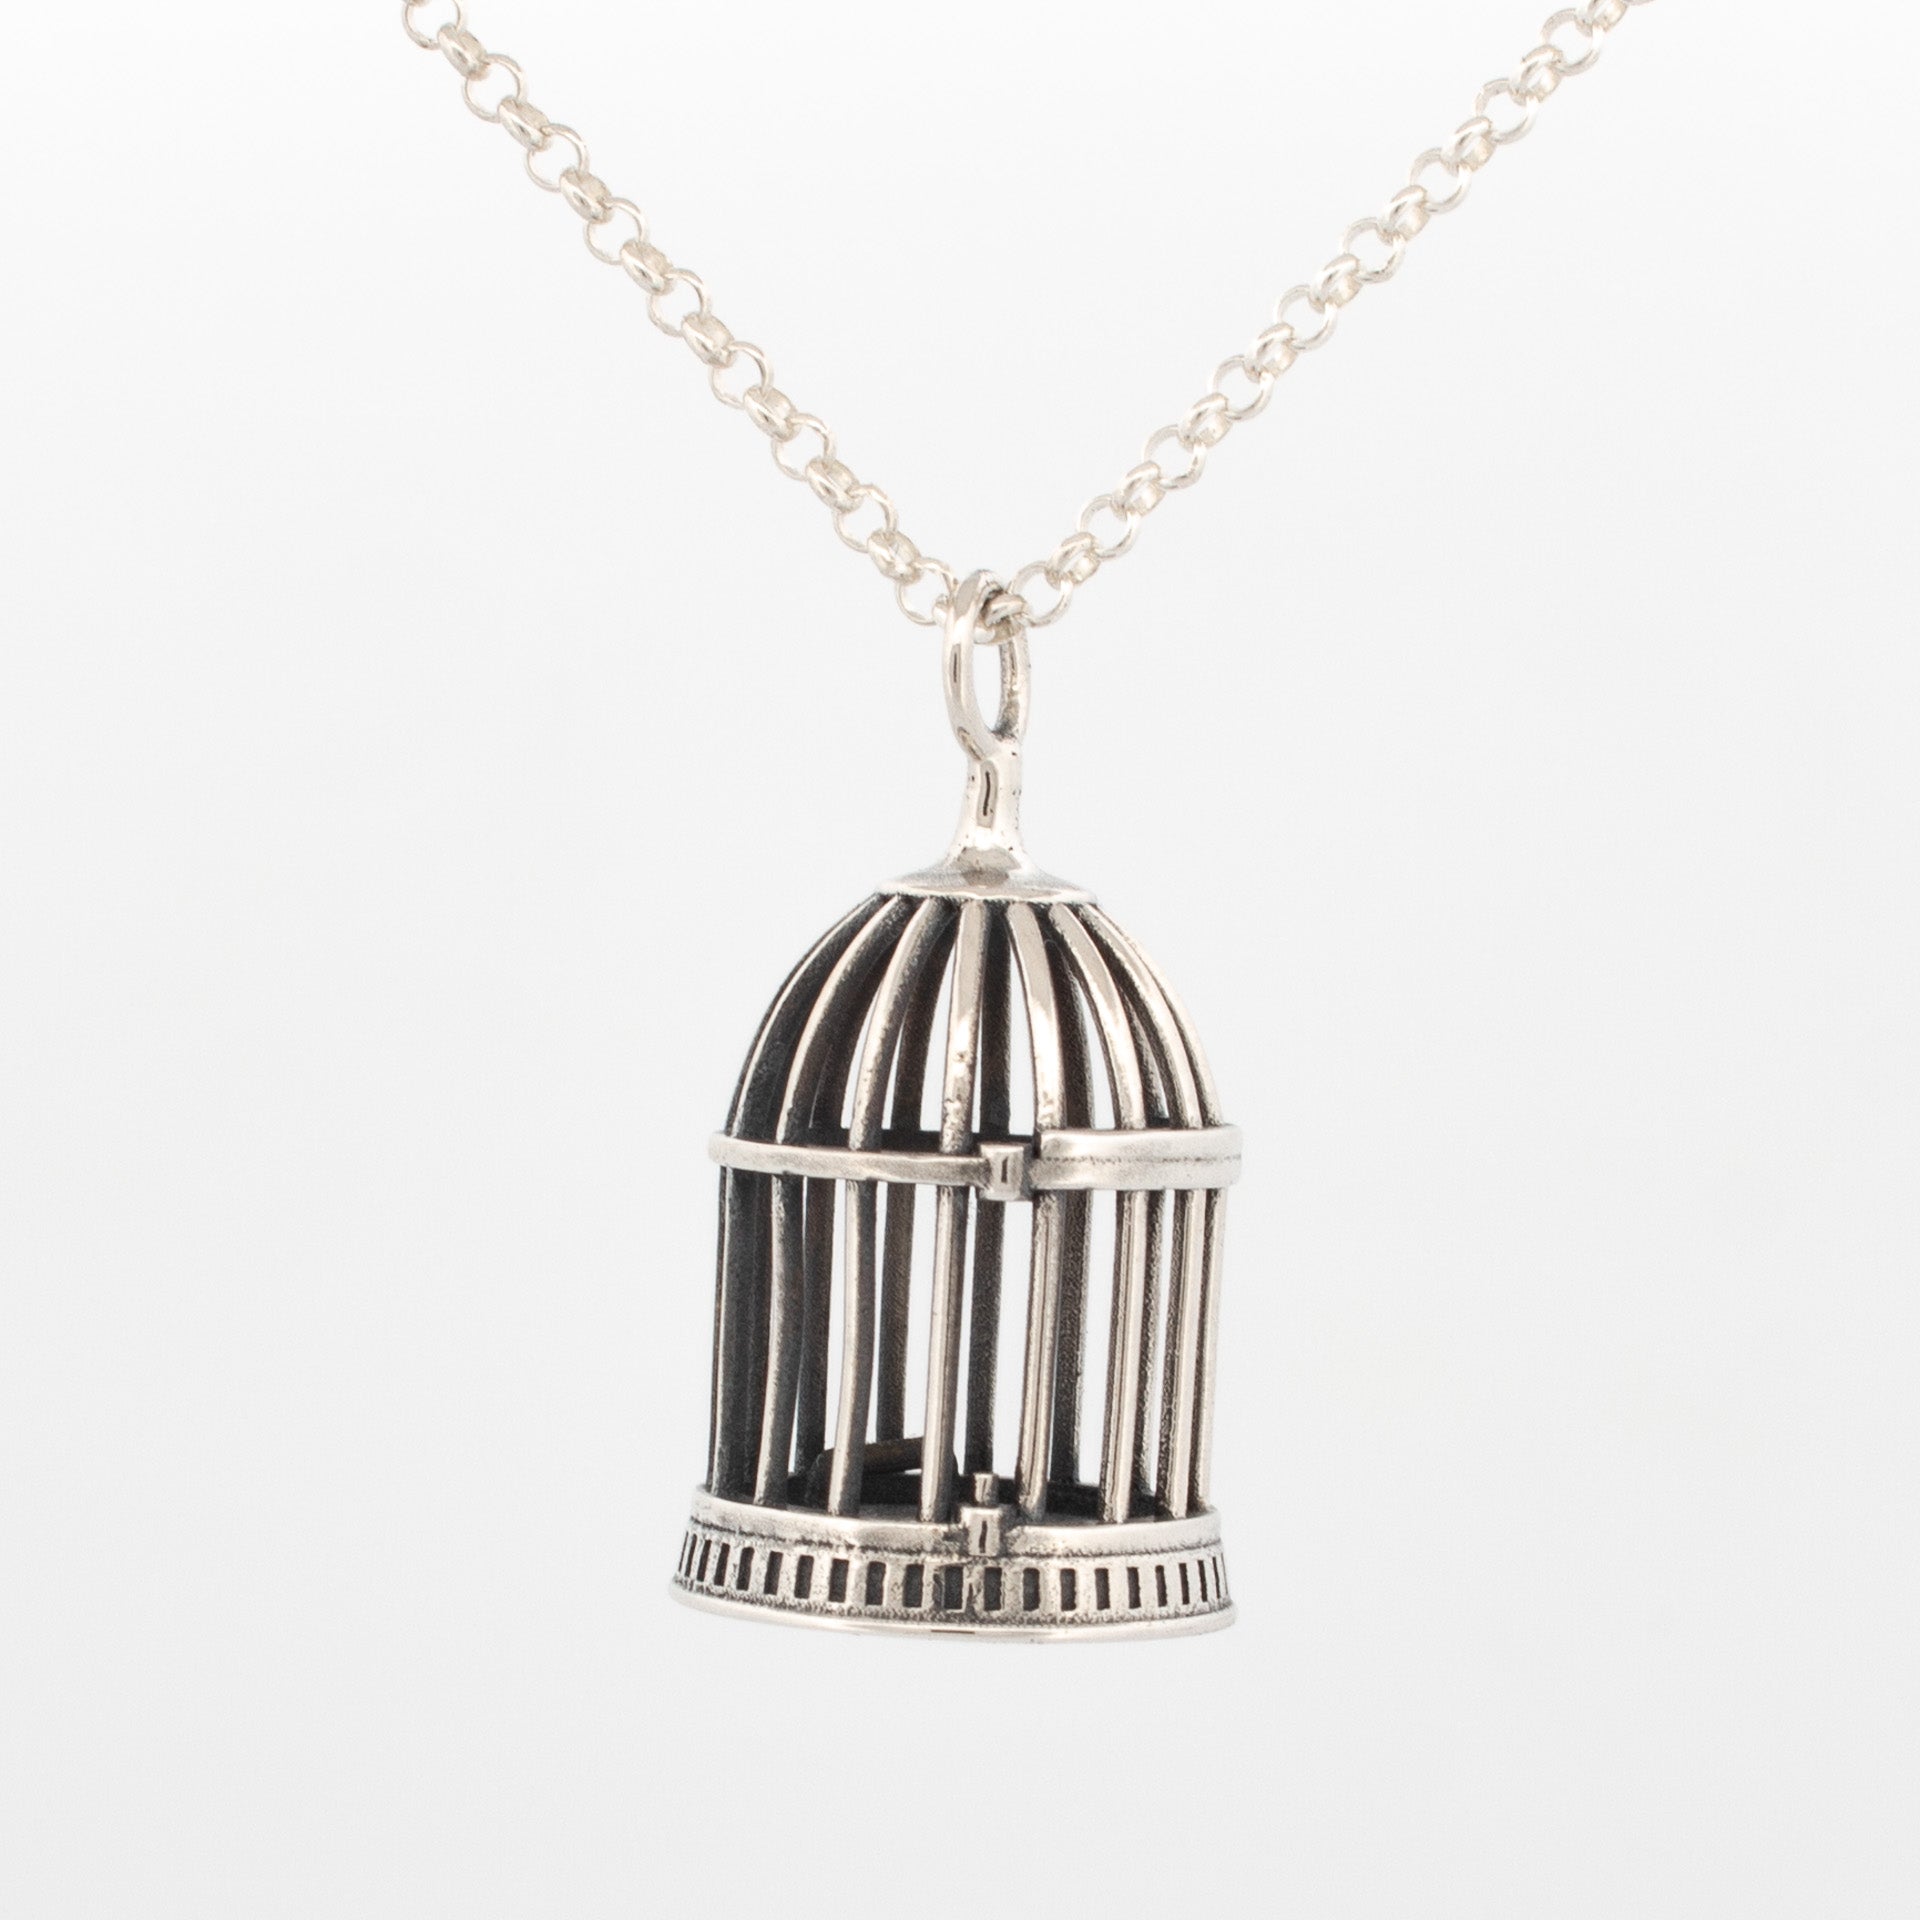 Custom Bird in a Cage Pendant Necklace | Art and photo by Sh… | Flickr